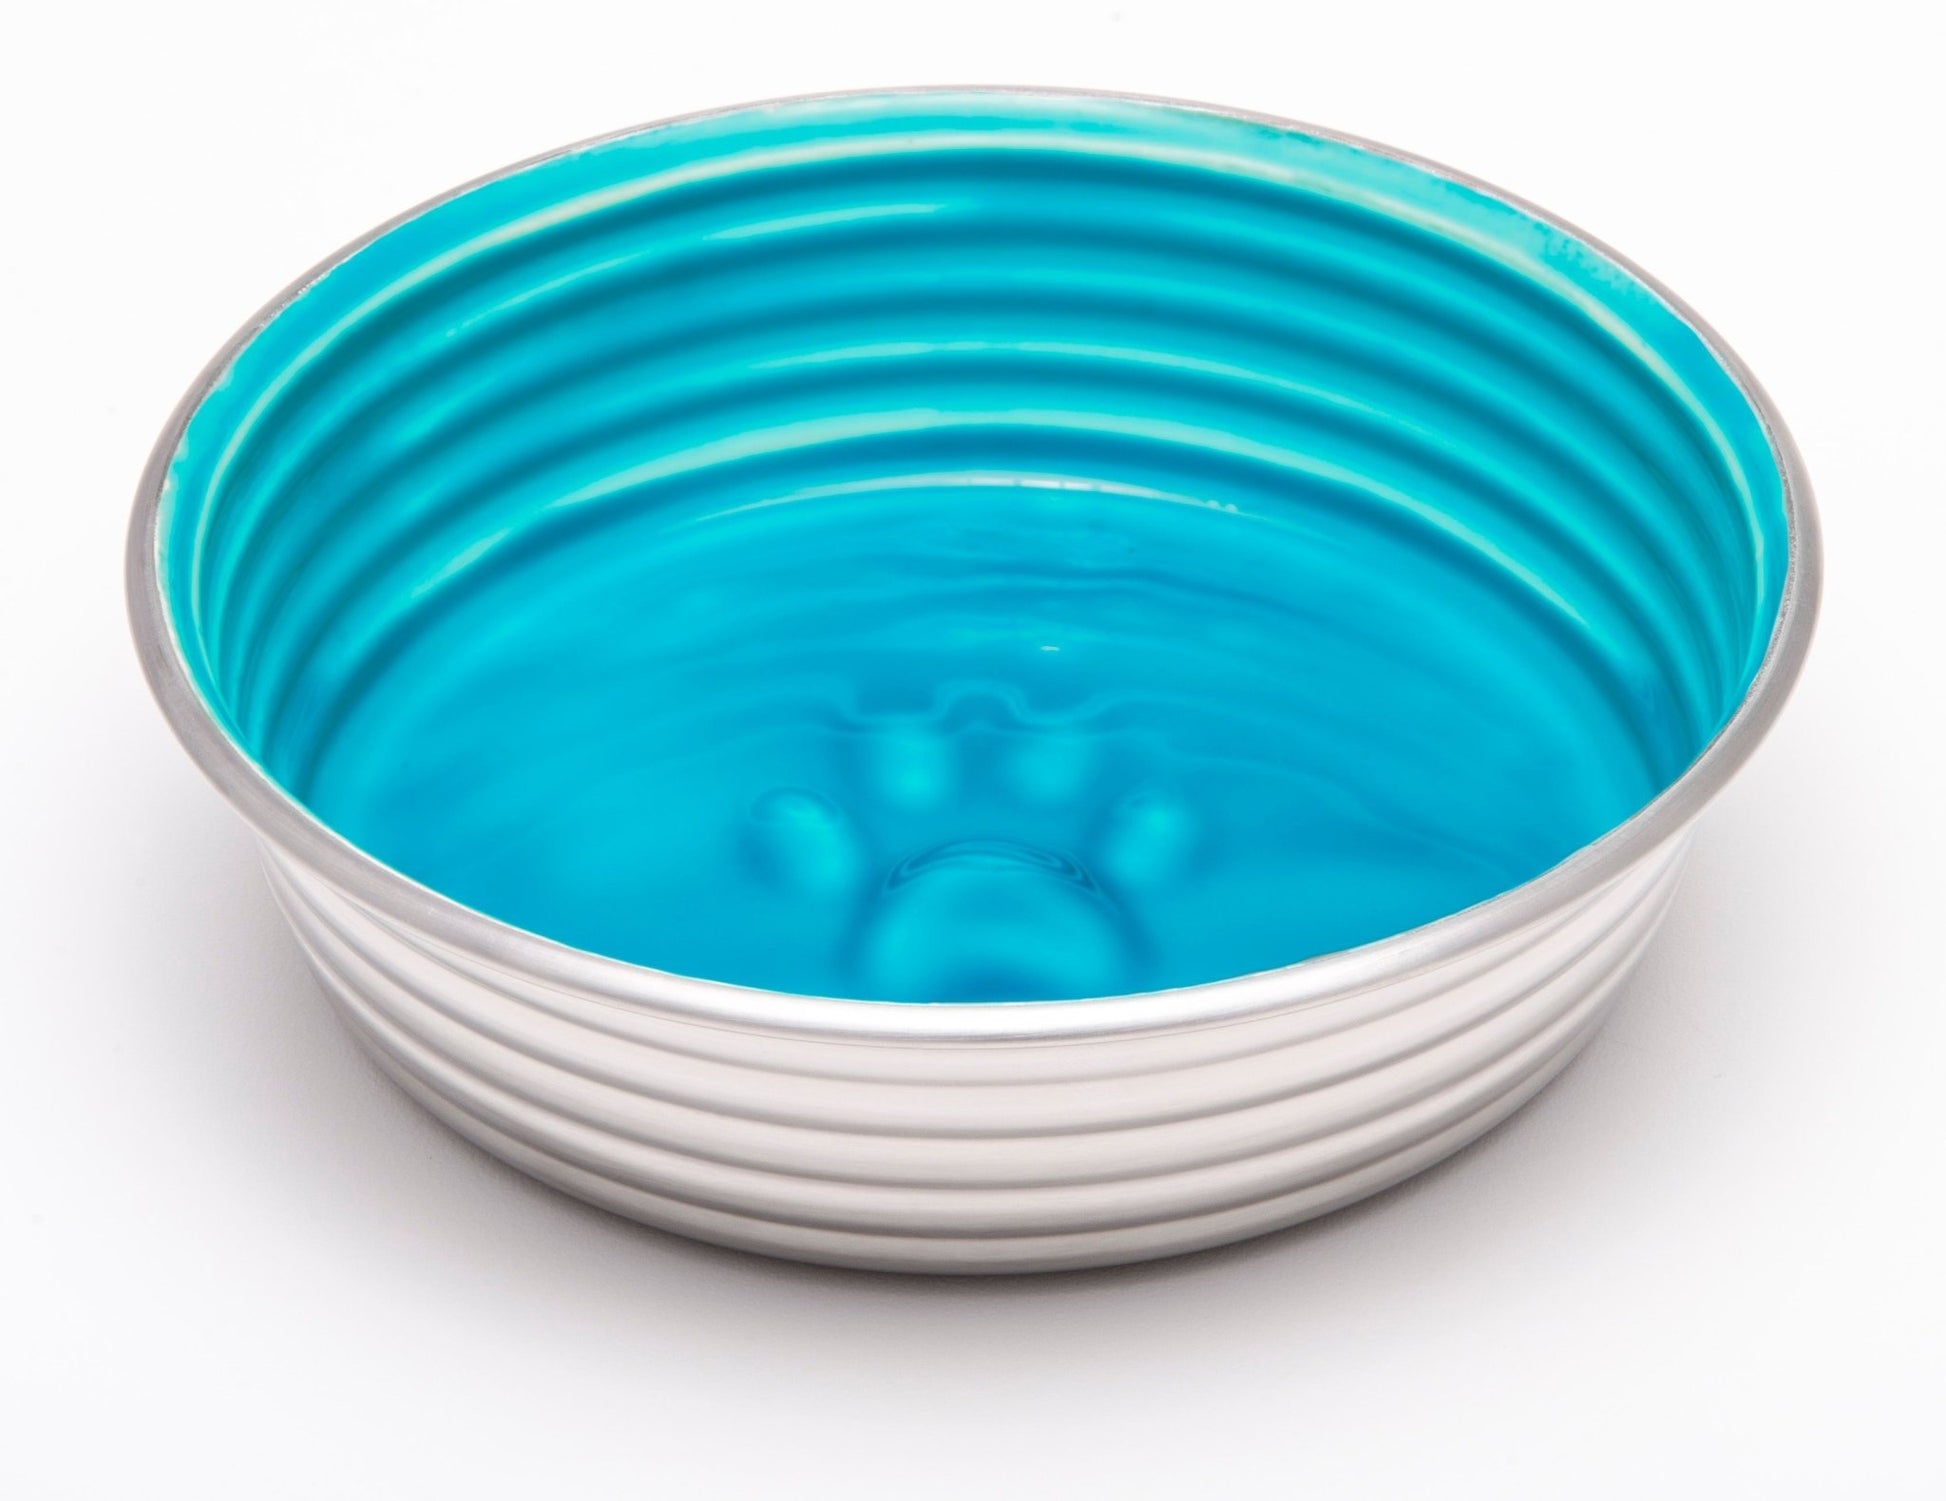 Le Bowl Stainless Steel Seine Blue - Woonona Petfood & Produce